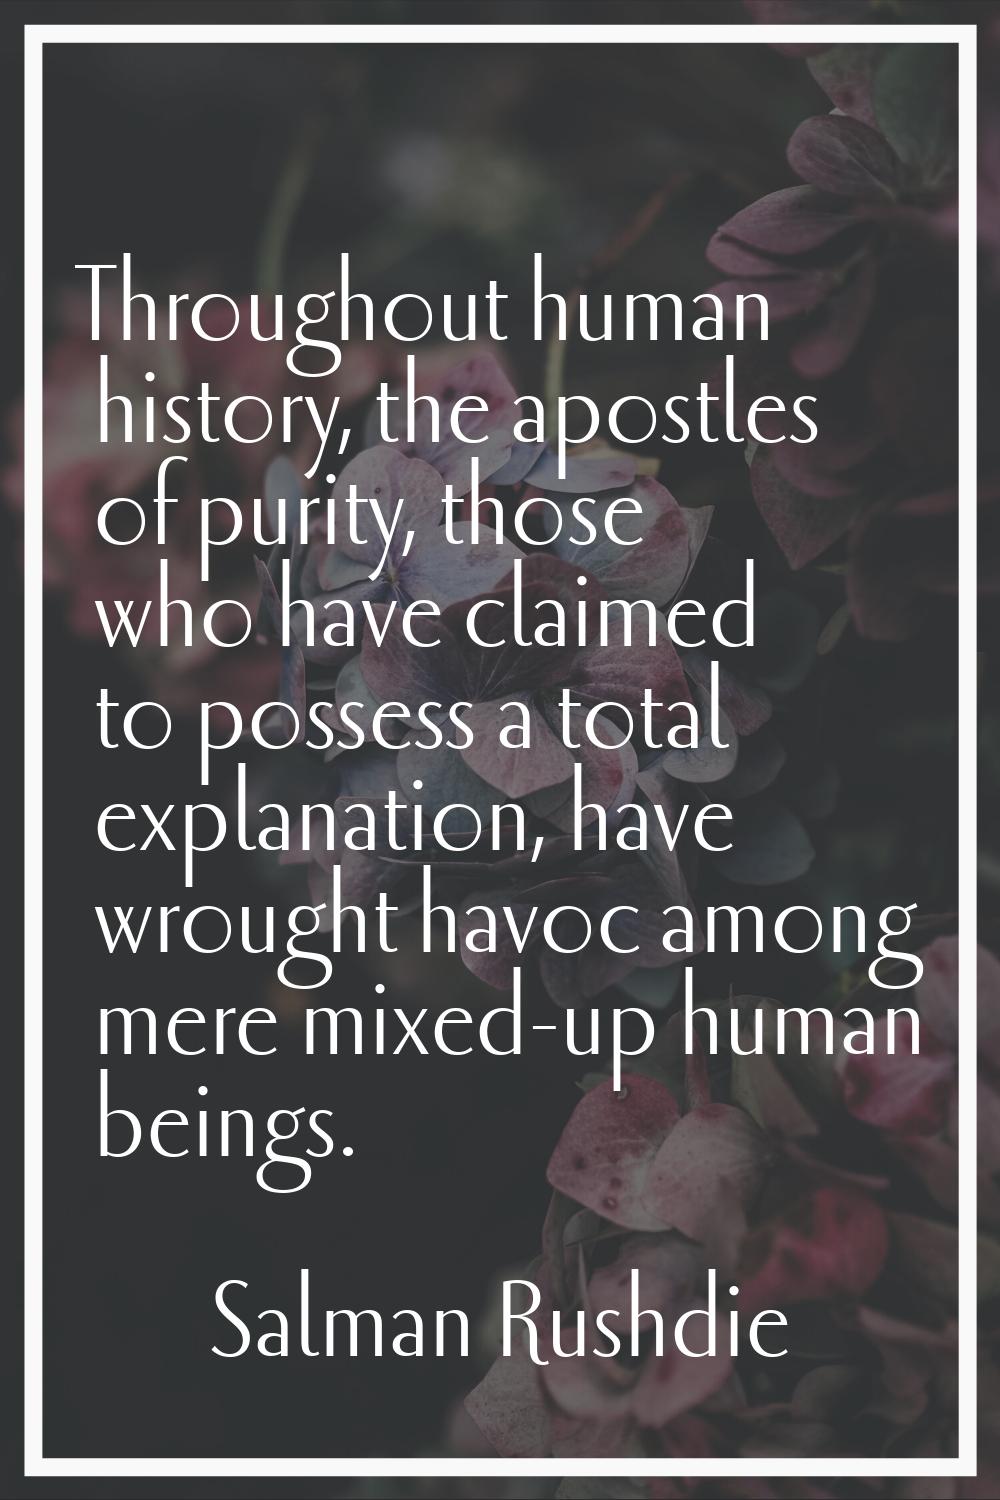 Throughout human history, the apostles of purity, those who have claimed to possess a total explana